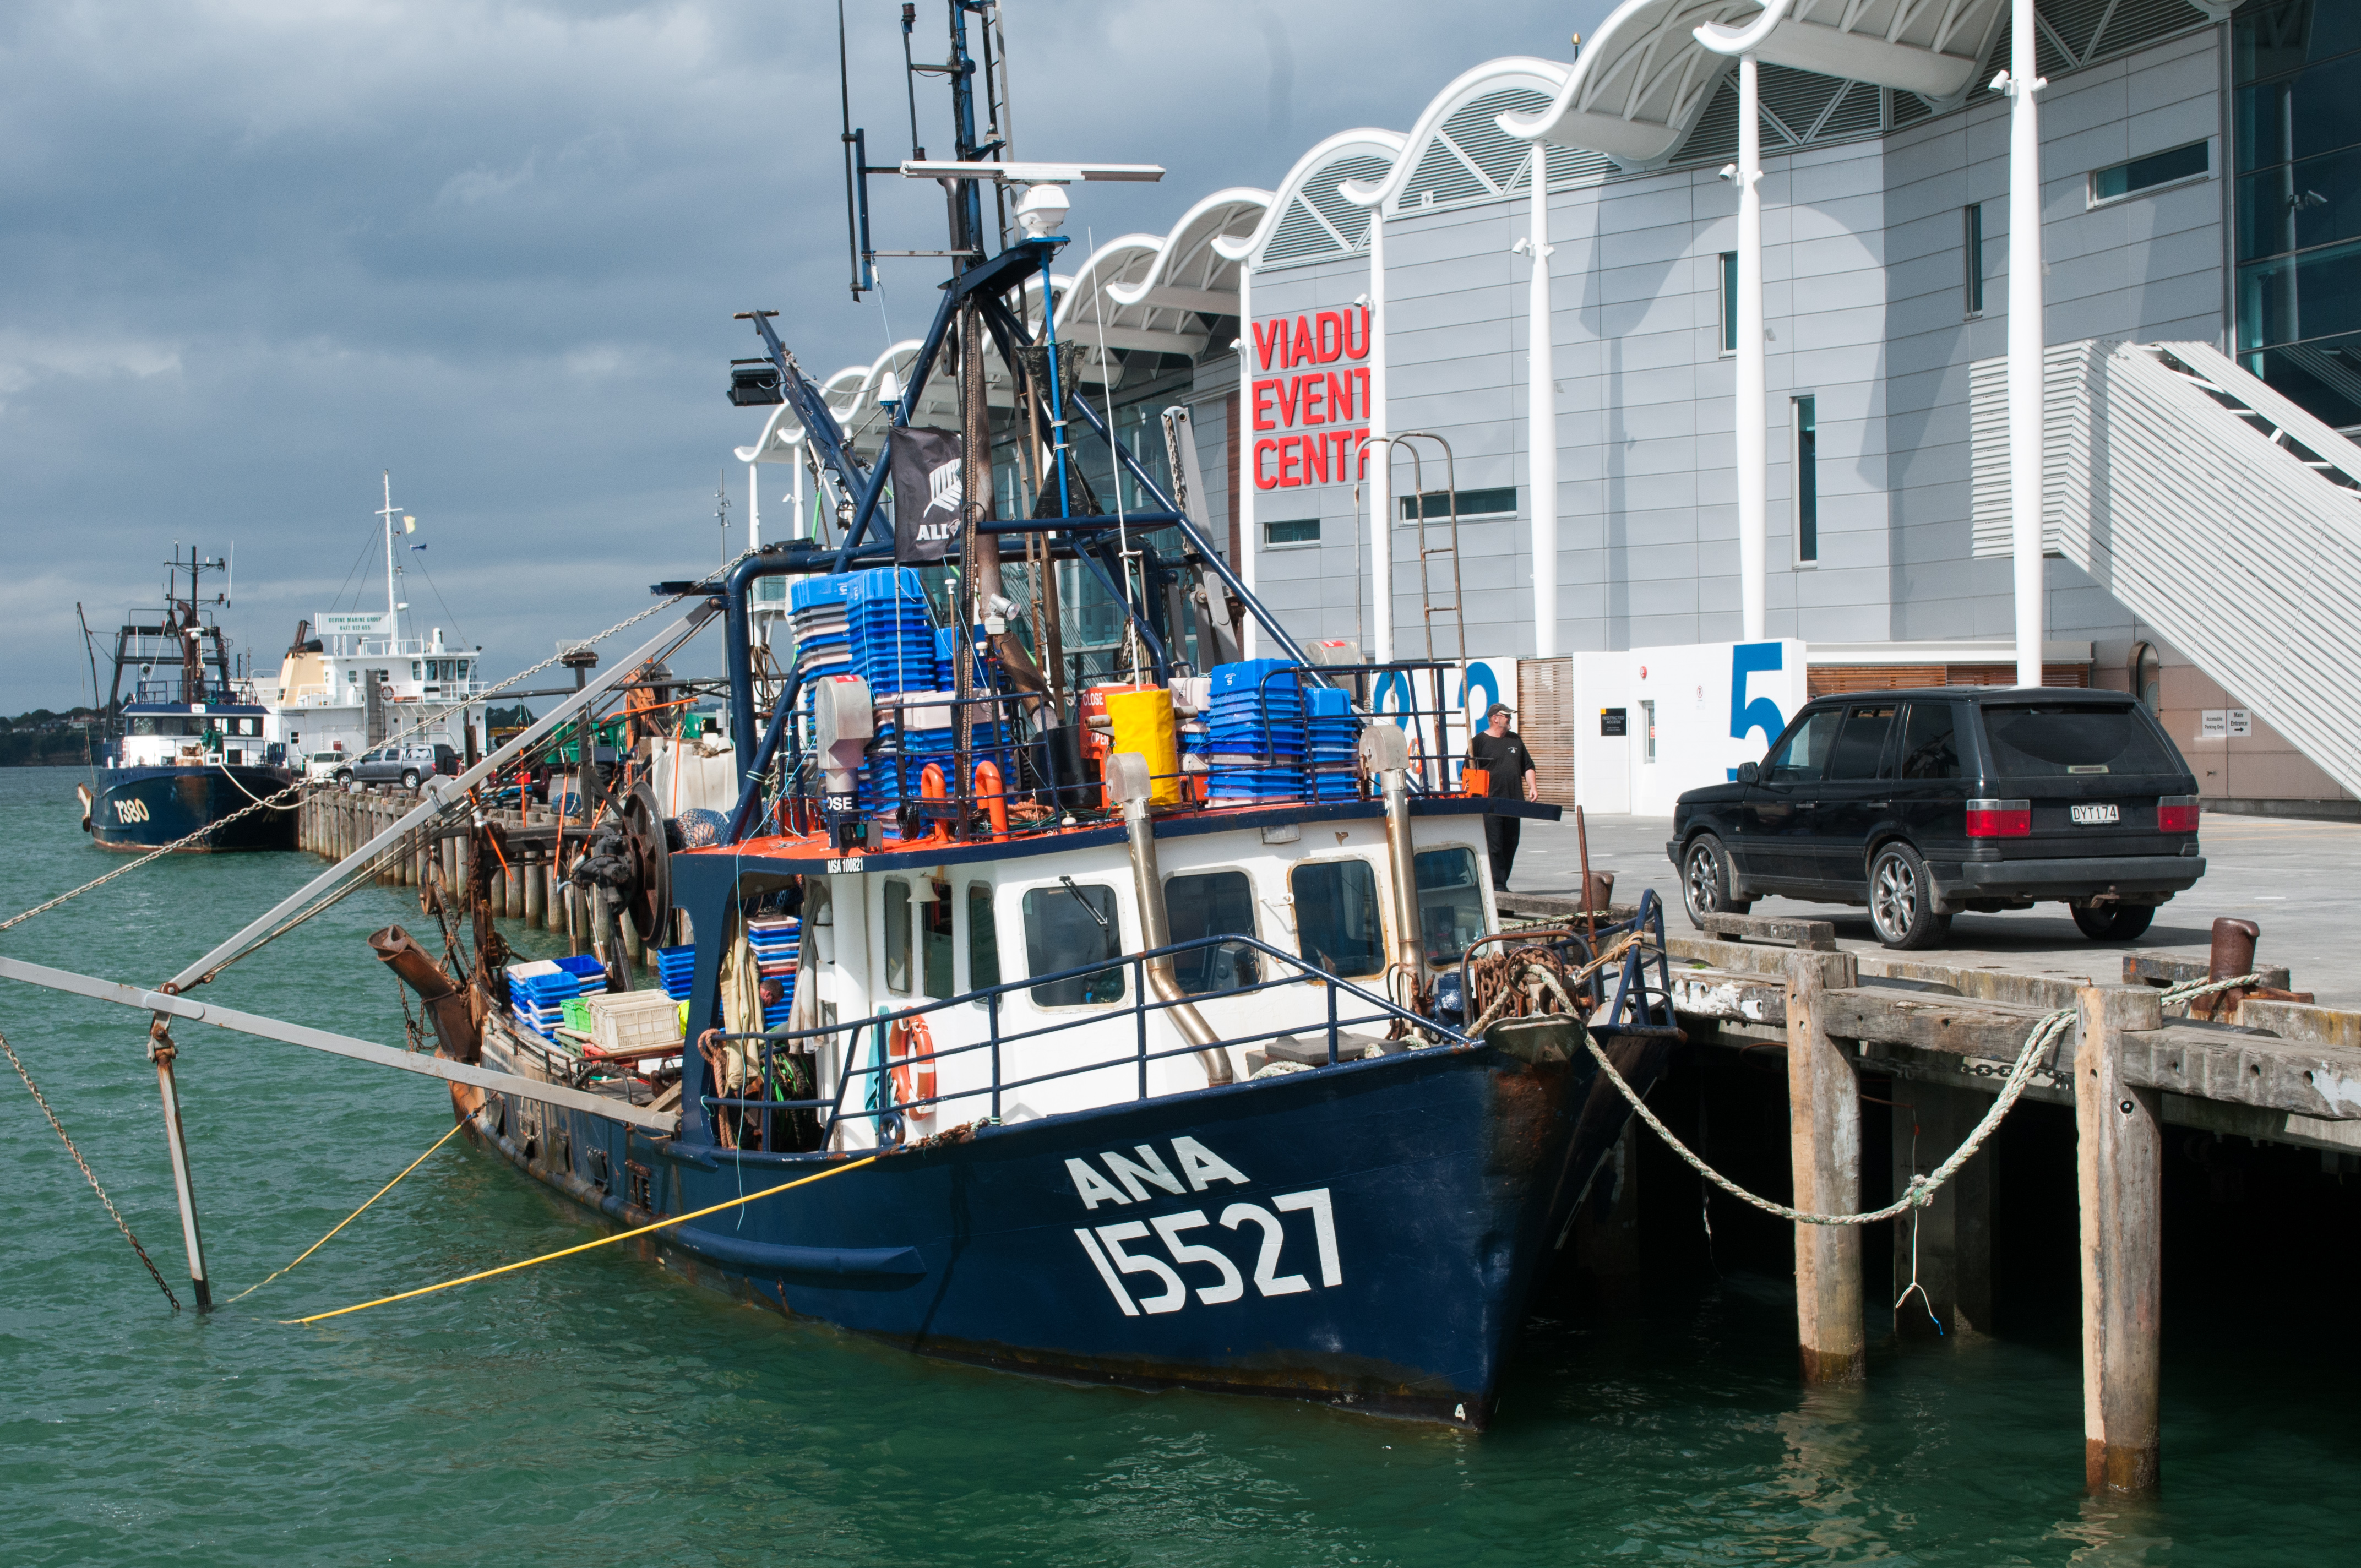 Fishing vessel docked in front of viaduct events centre photo